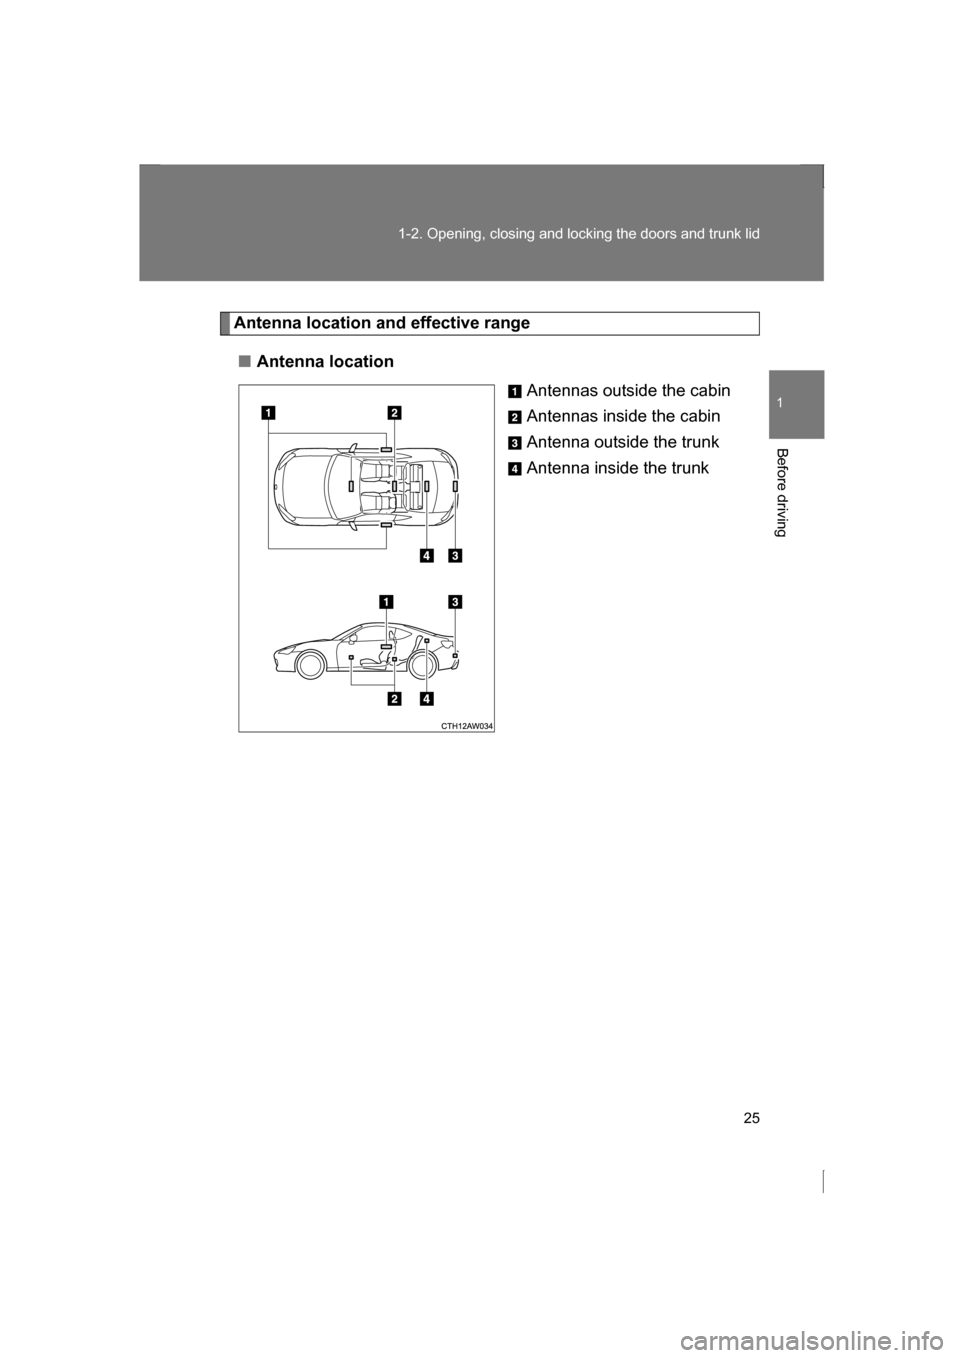 SUBARU BRZ 2013 1.G Owners Manual 25
1-2. Opening, closing and locking the doors and trunk lid
1
Before driving
Antenna location and effective range
■Antenna locationAntennas outside the cabin 
Antennas inside the cabin
Antenna outs